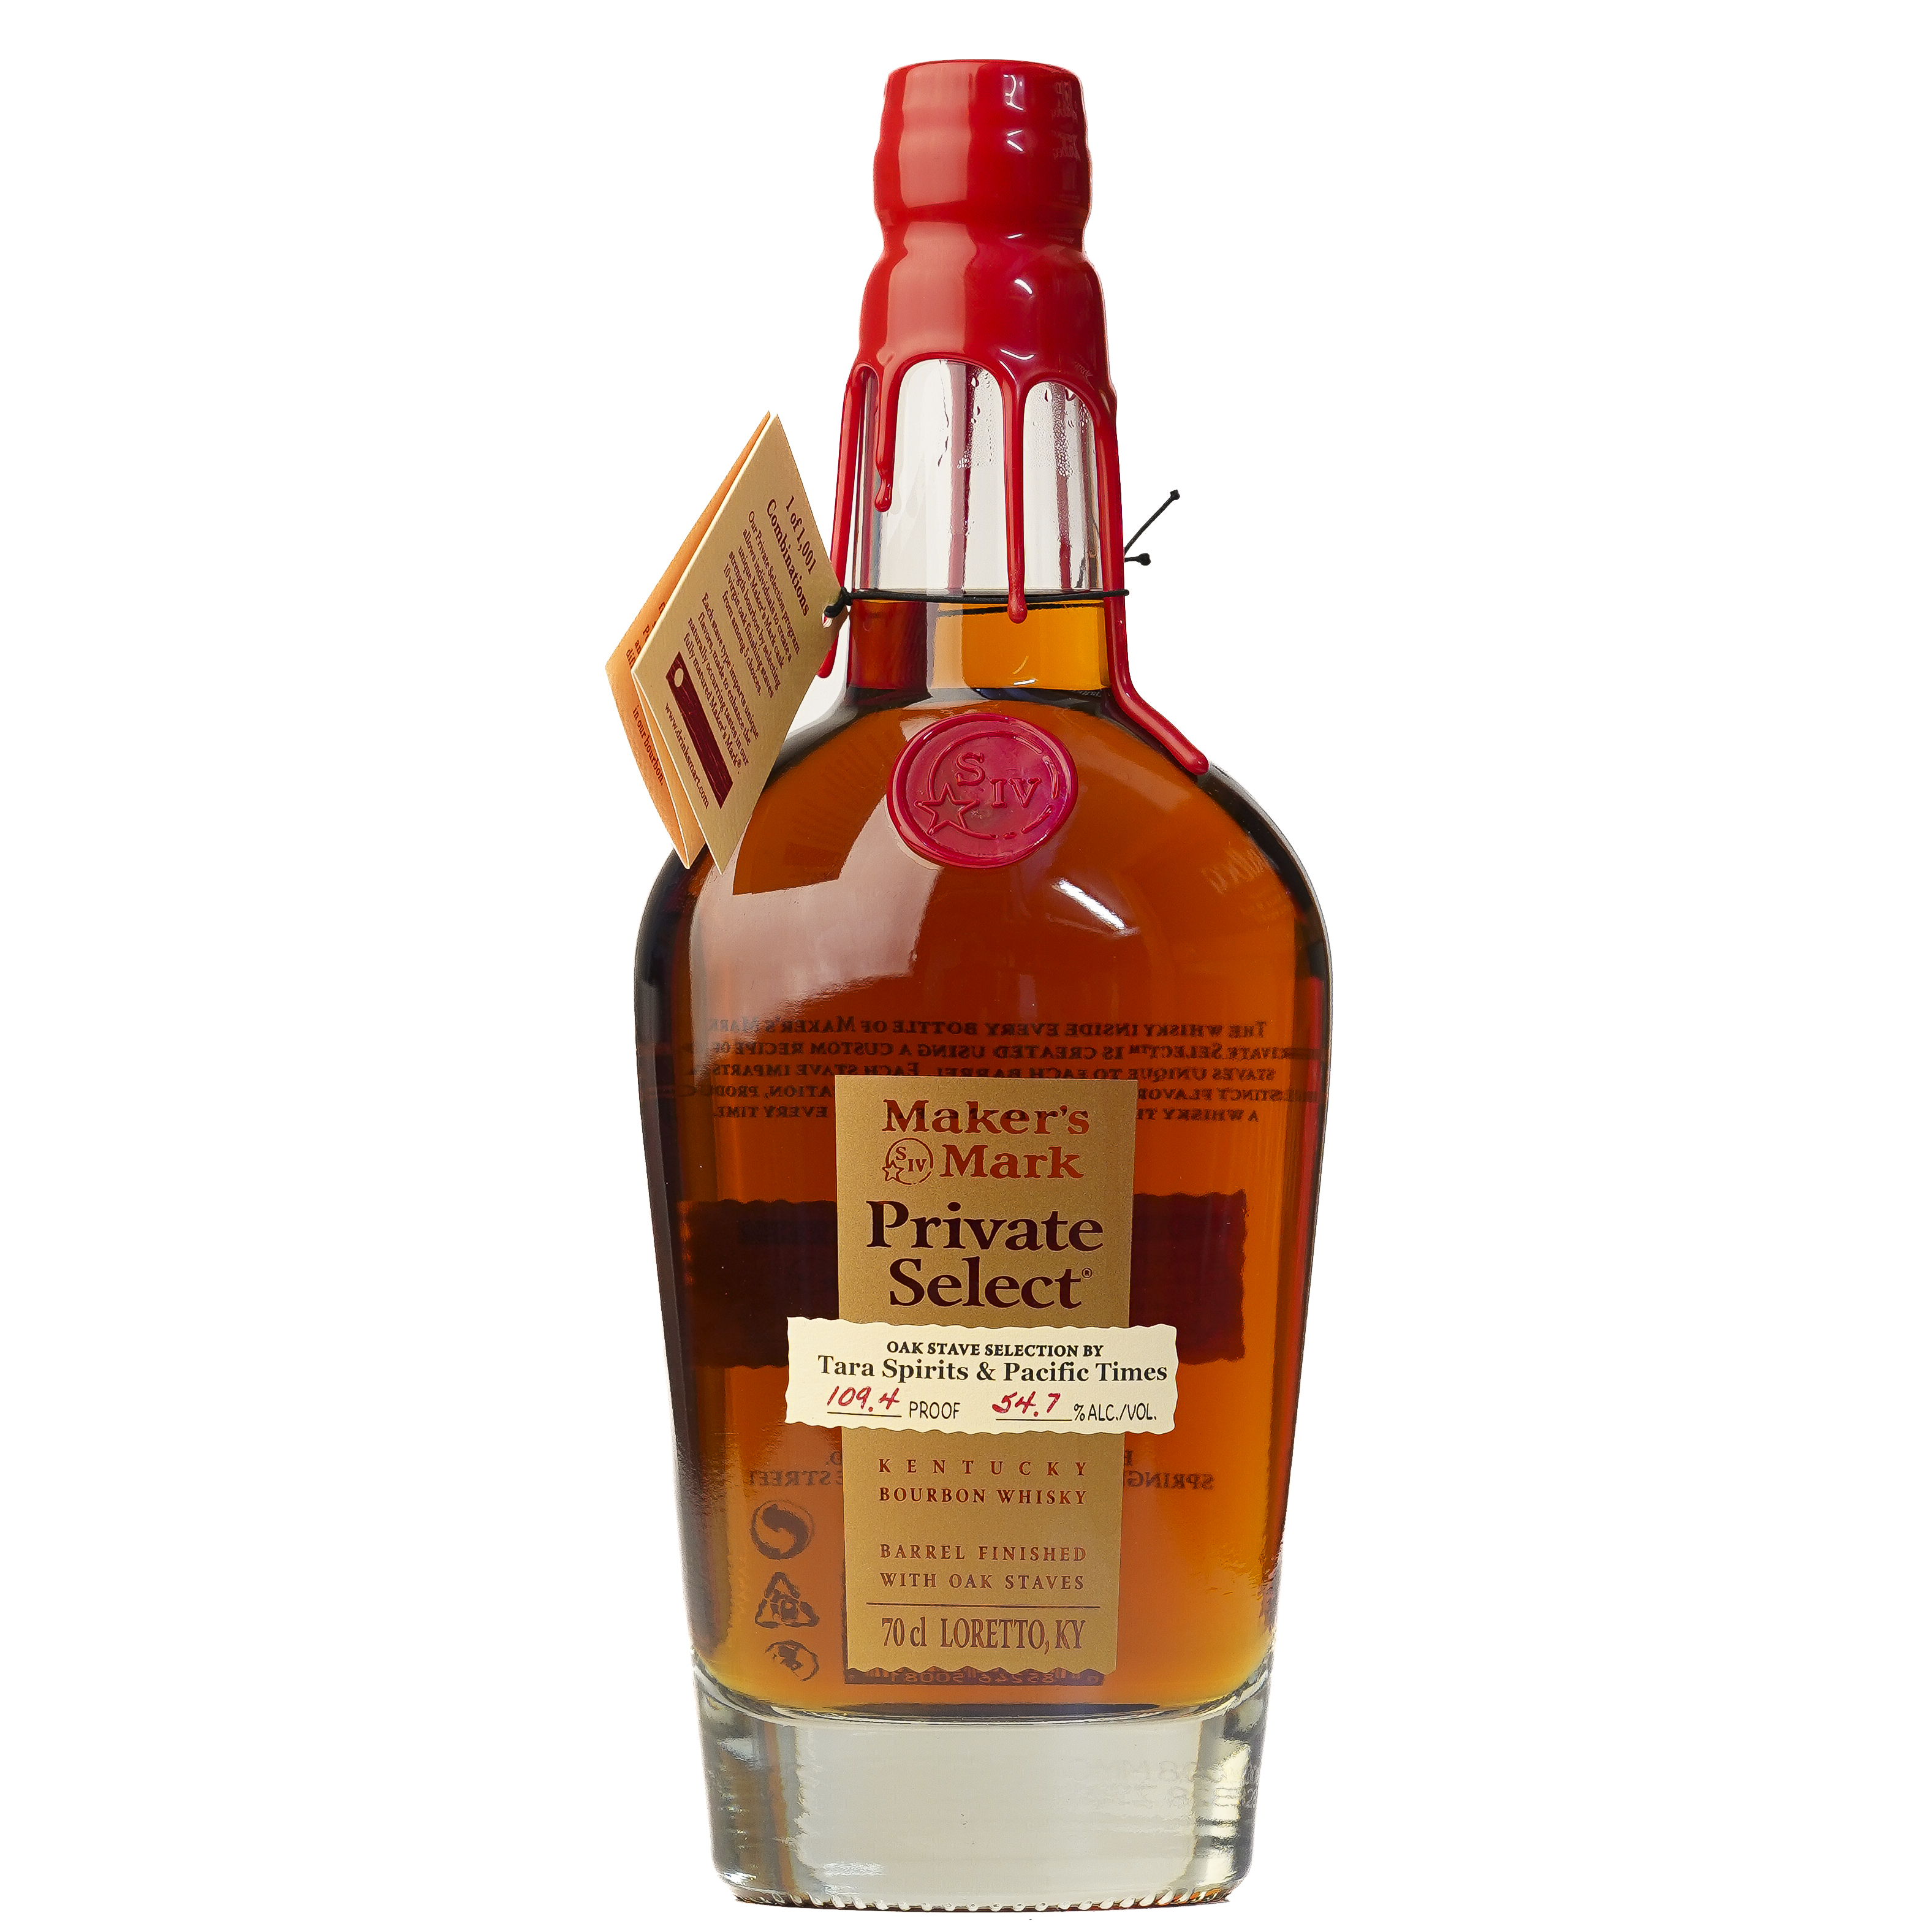 Makers's Mark Private Select Tara Spirits & Pacific Times